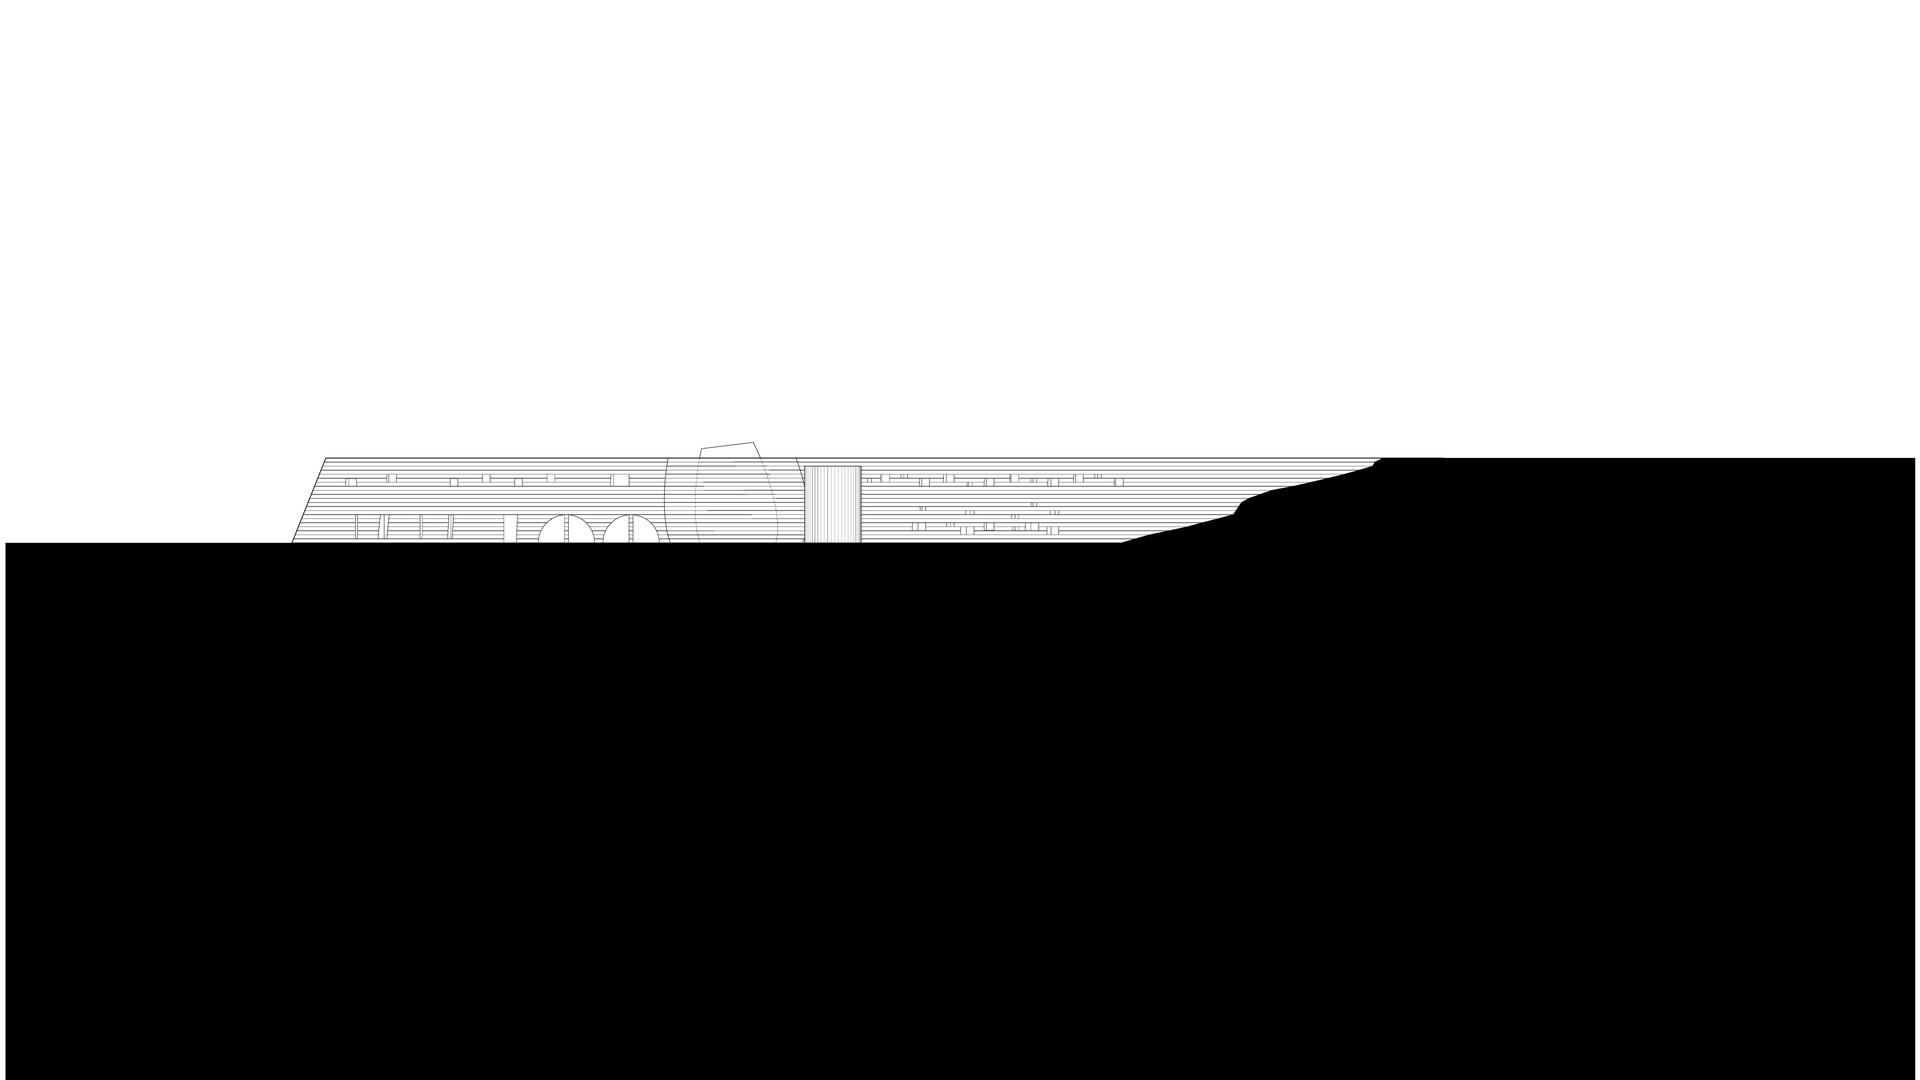 OHA - 758 BAMIYAN CULTURAL CENTER 10 - Office For Heuristic Architecture